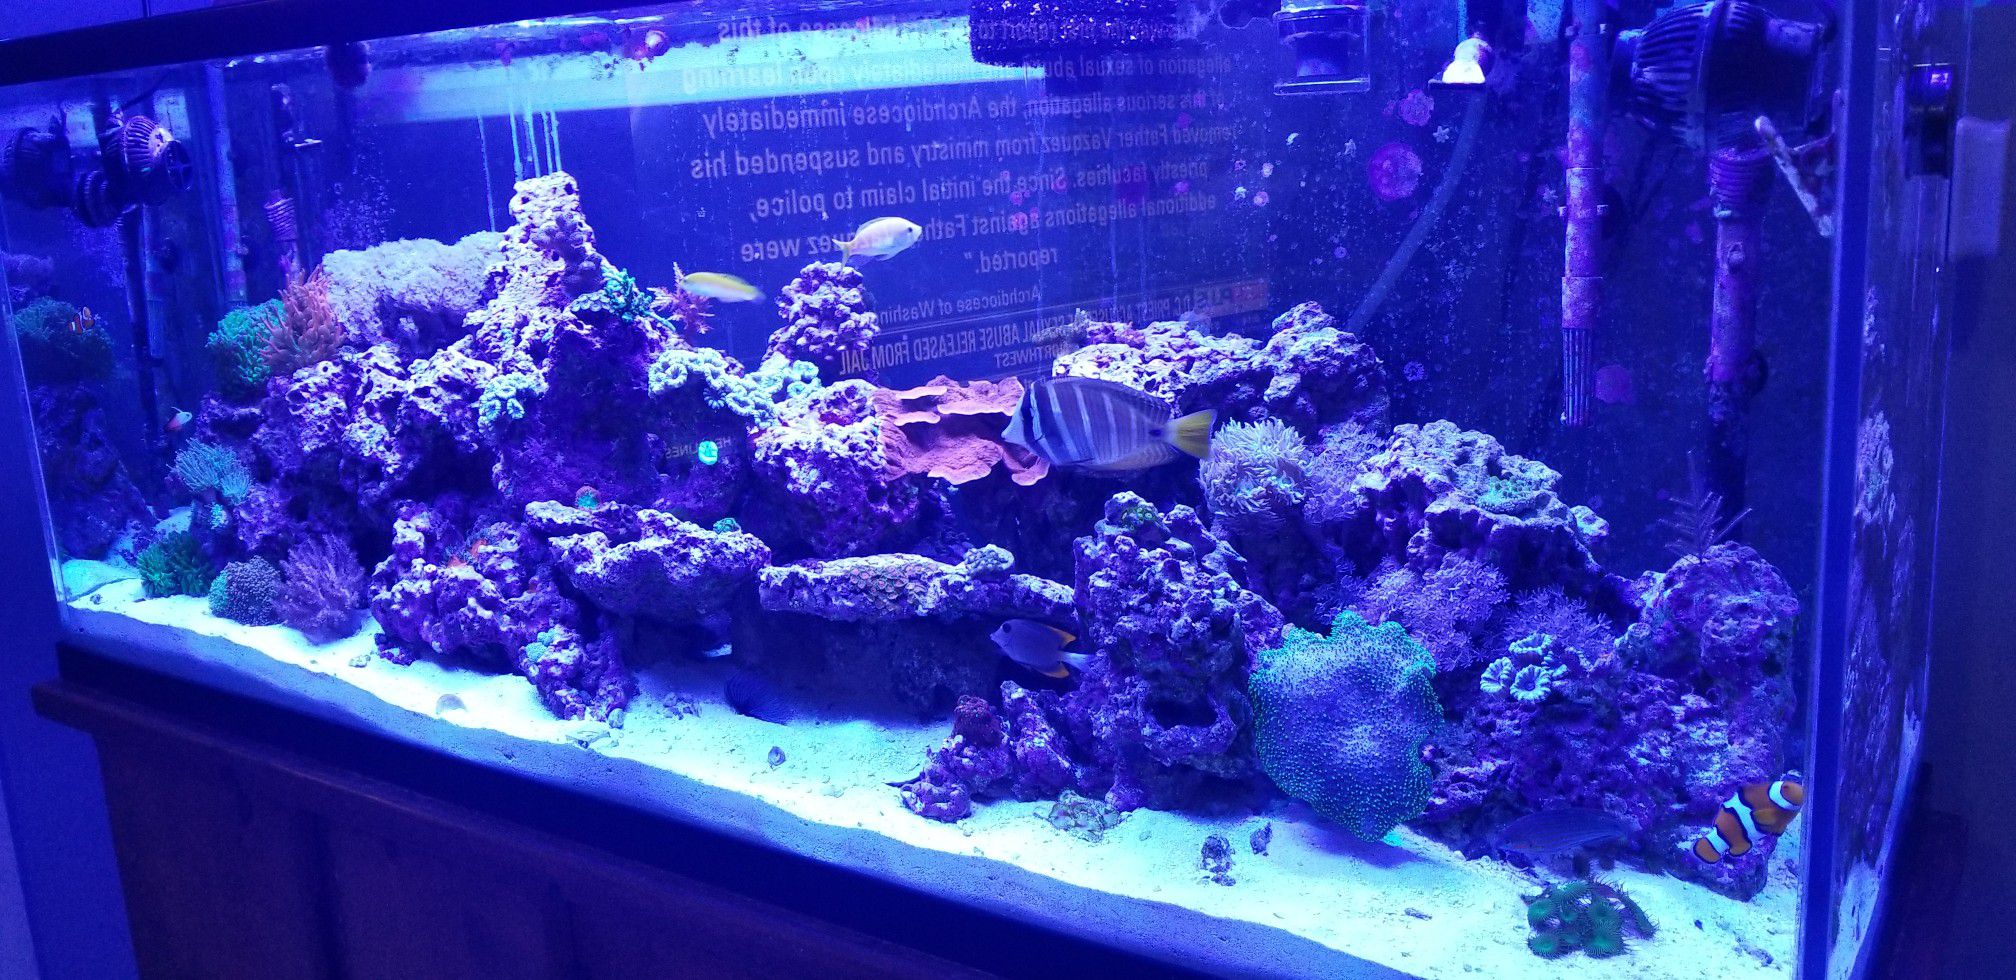 Salt water tank over 60 corals LPS,softies,and SPS,Anemones etc live rock 110 gallon tank!